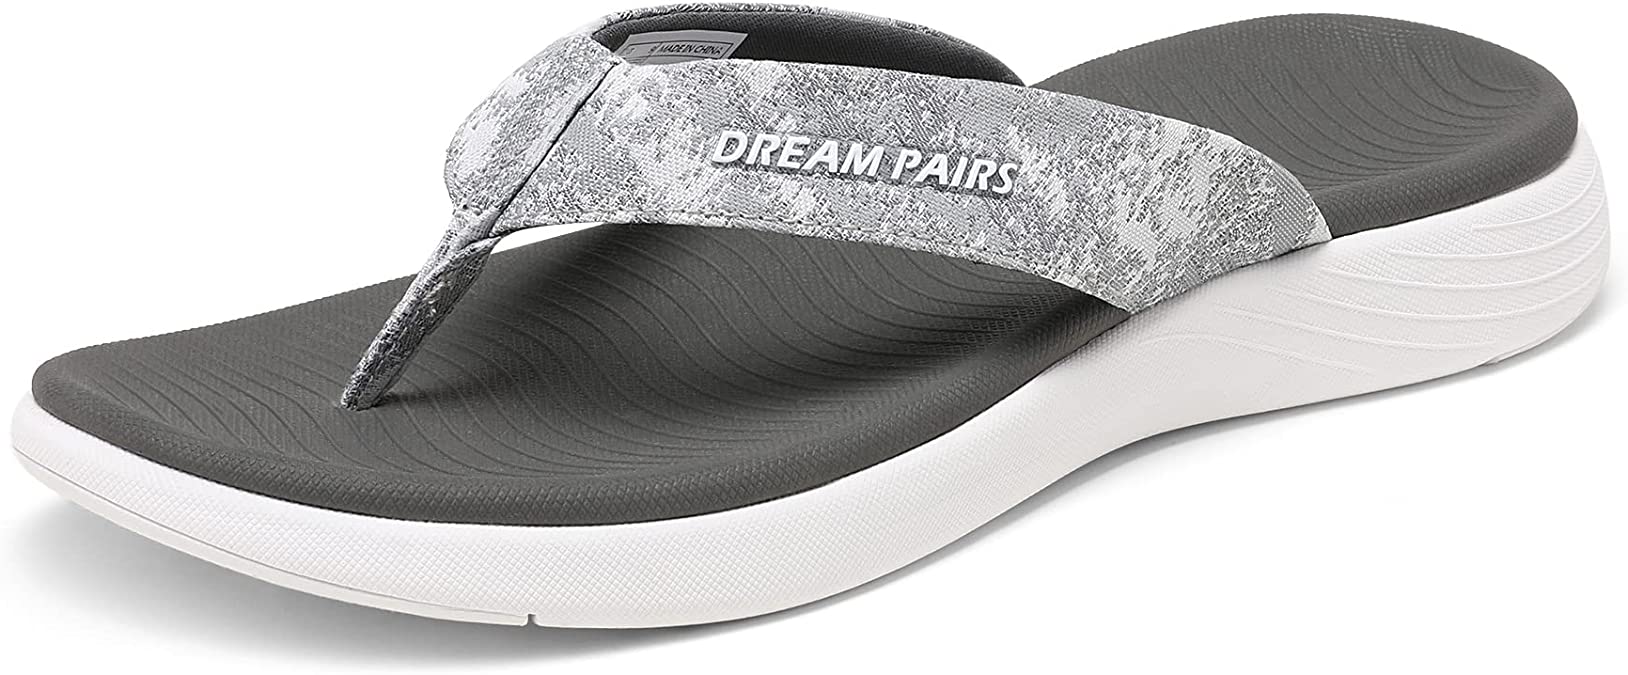 DREAM PAIRS Men's Arch Support Flip Flops Comfortable Soft Cushion Thong Sandals Casual Indoor Outdoor Walking Beach Summer Shoes